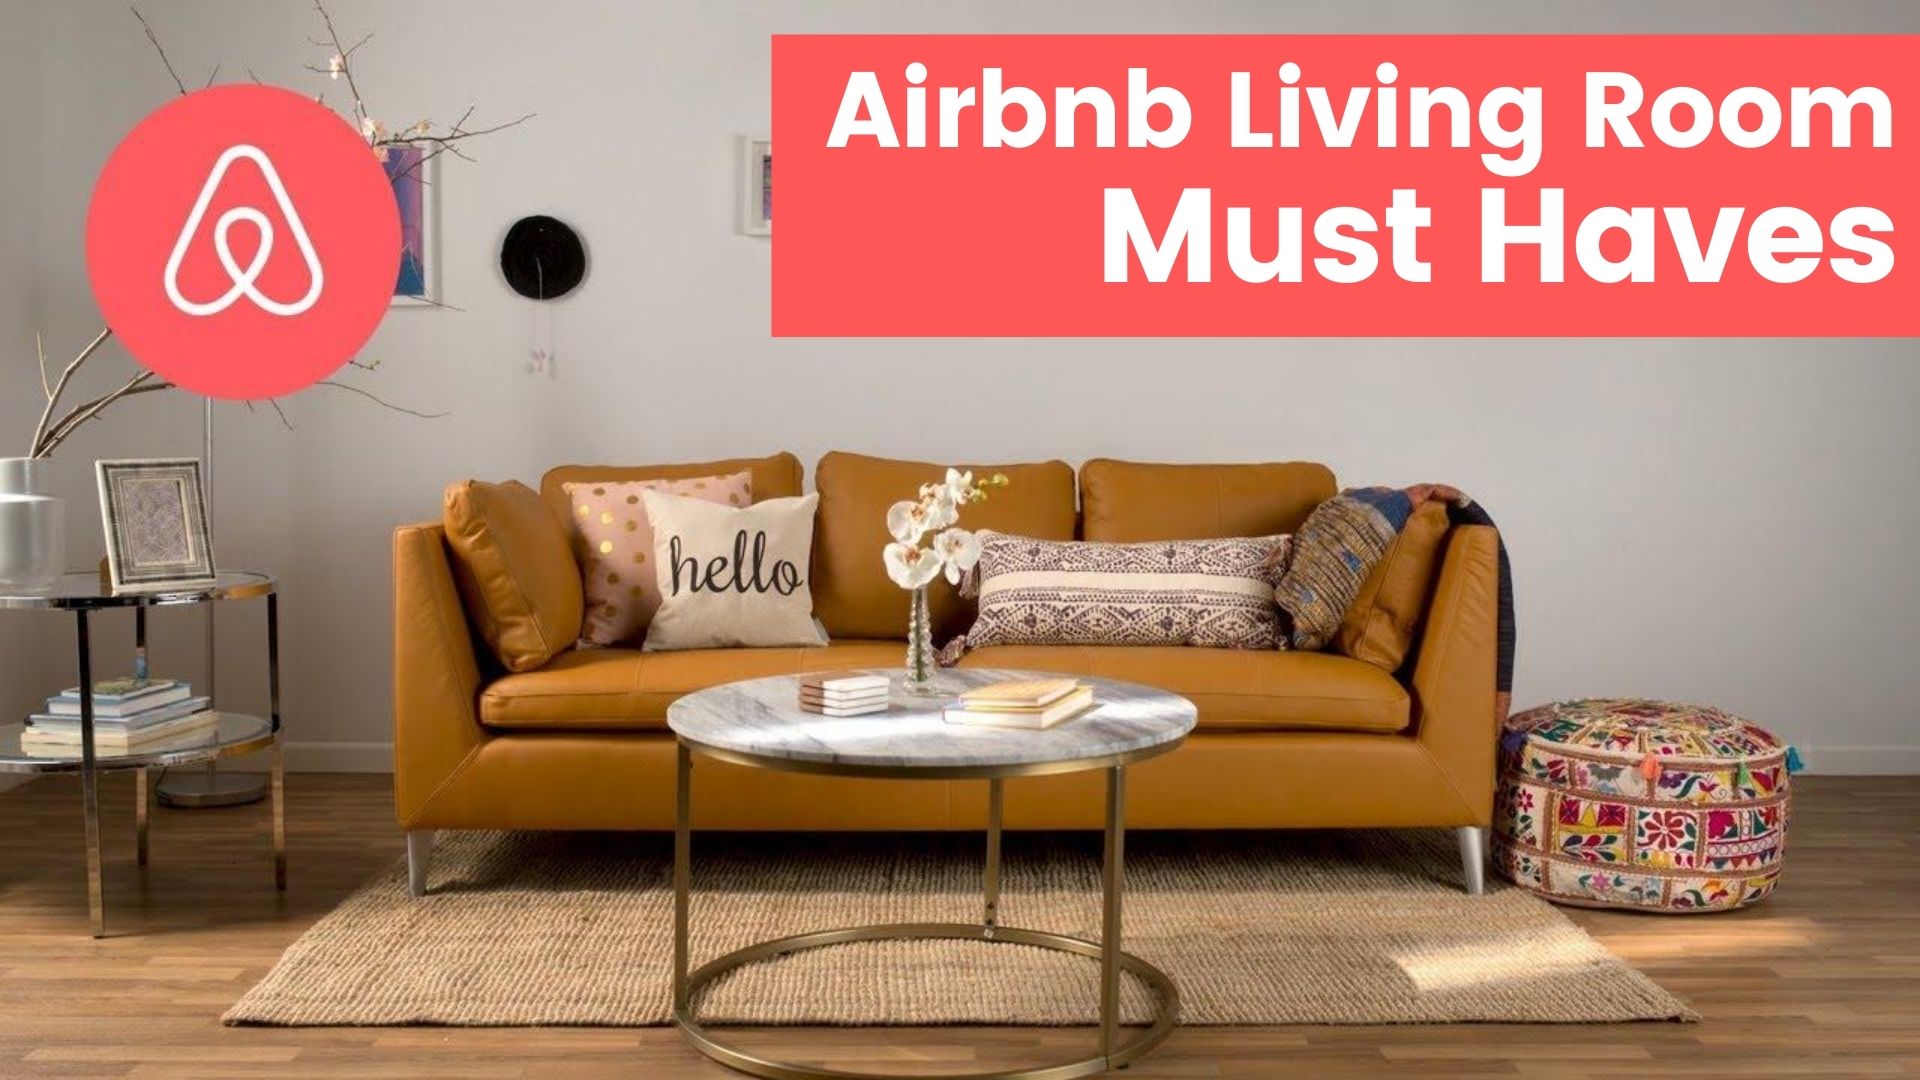 Airbnb Living Room Must haves